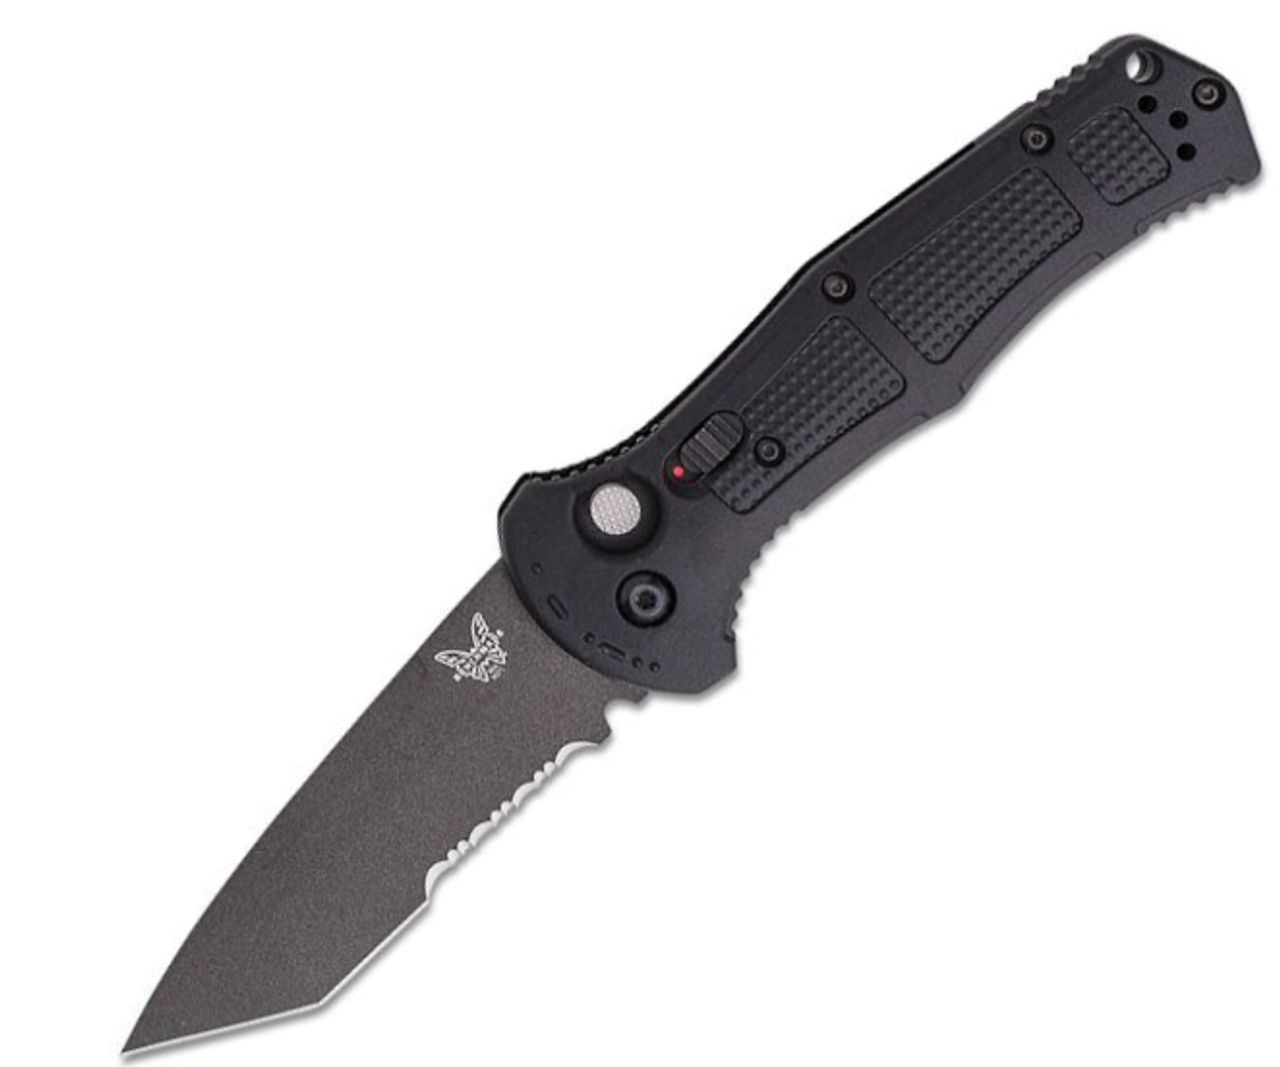 Benchmade Claymore (9071SBK) 3.6" D2 Black Tanto Partially Serrated Blade, Cobalt Black Textured Grivory Handle